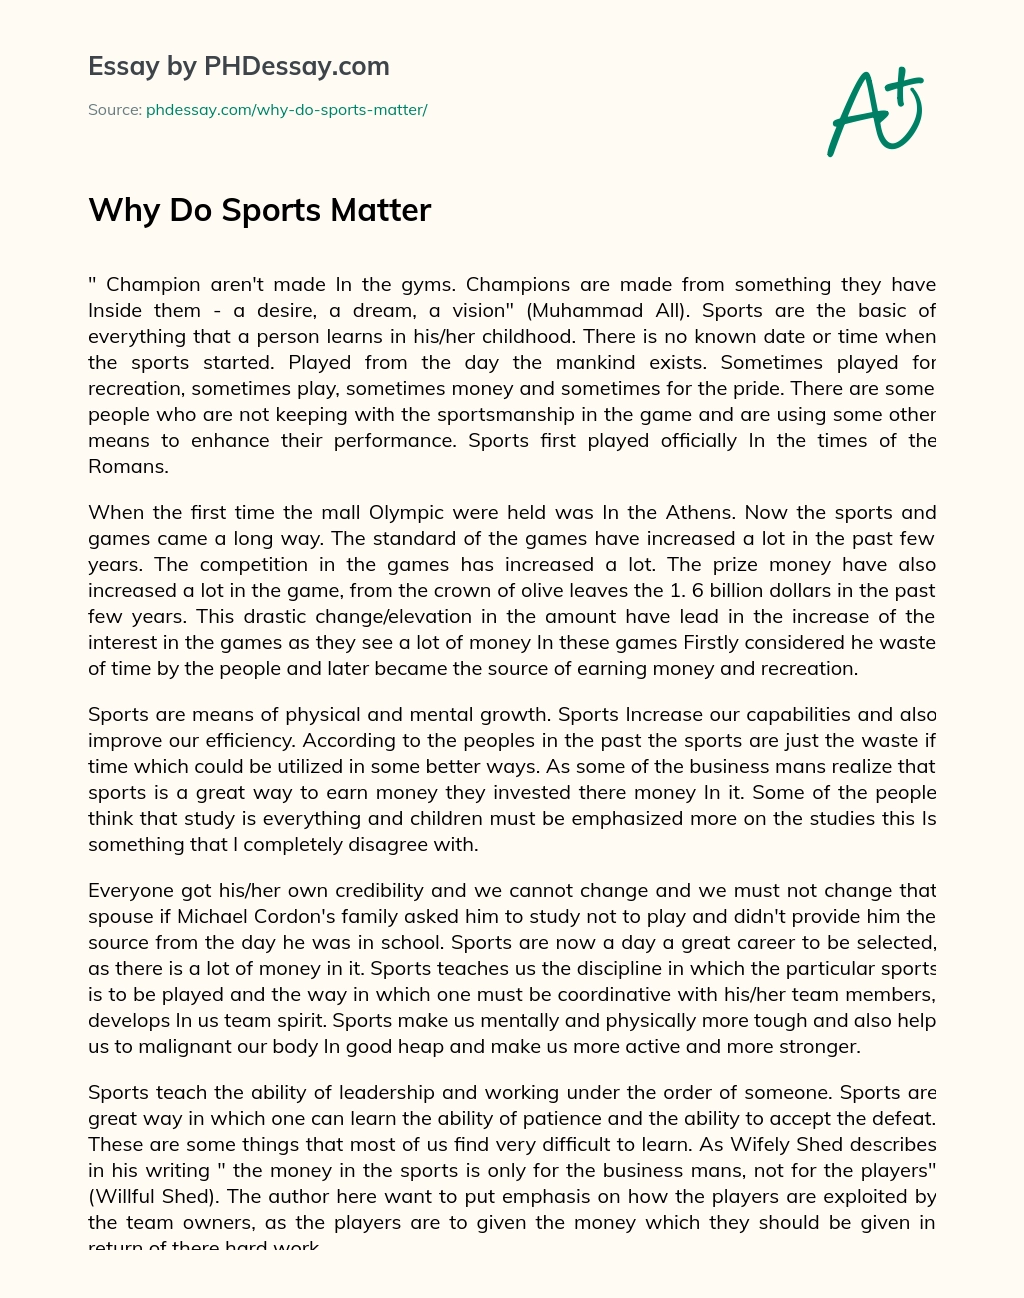 Why Do Sports Matter essay